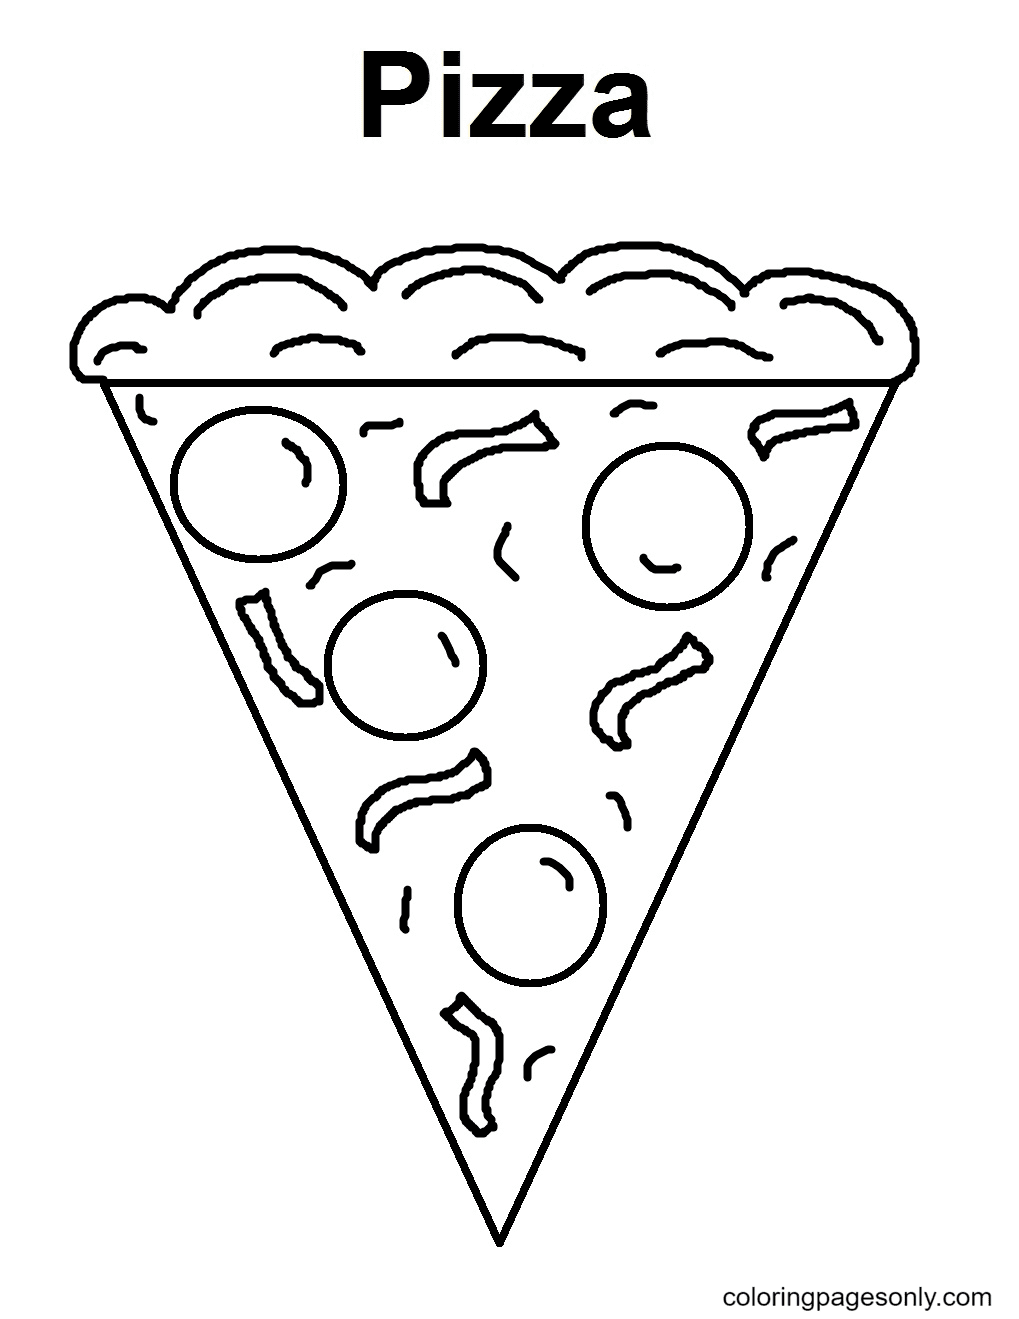 Printable Slices of Pizza Coloring Page